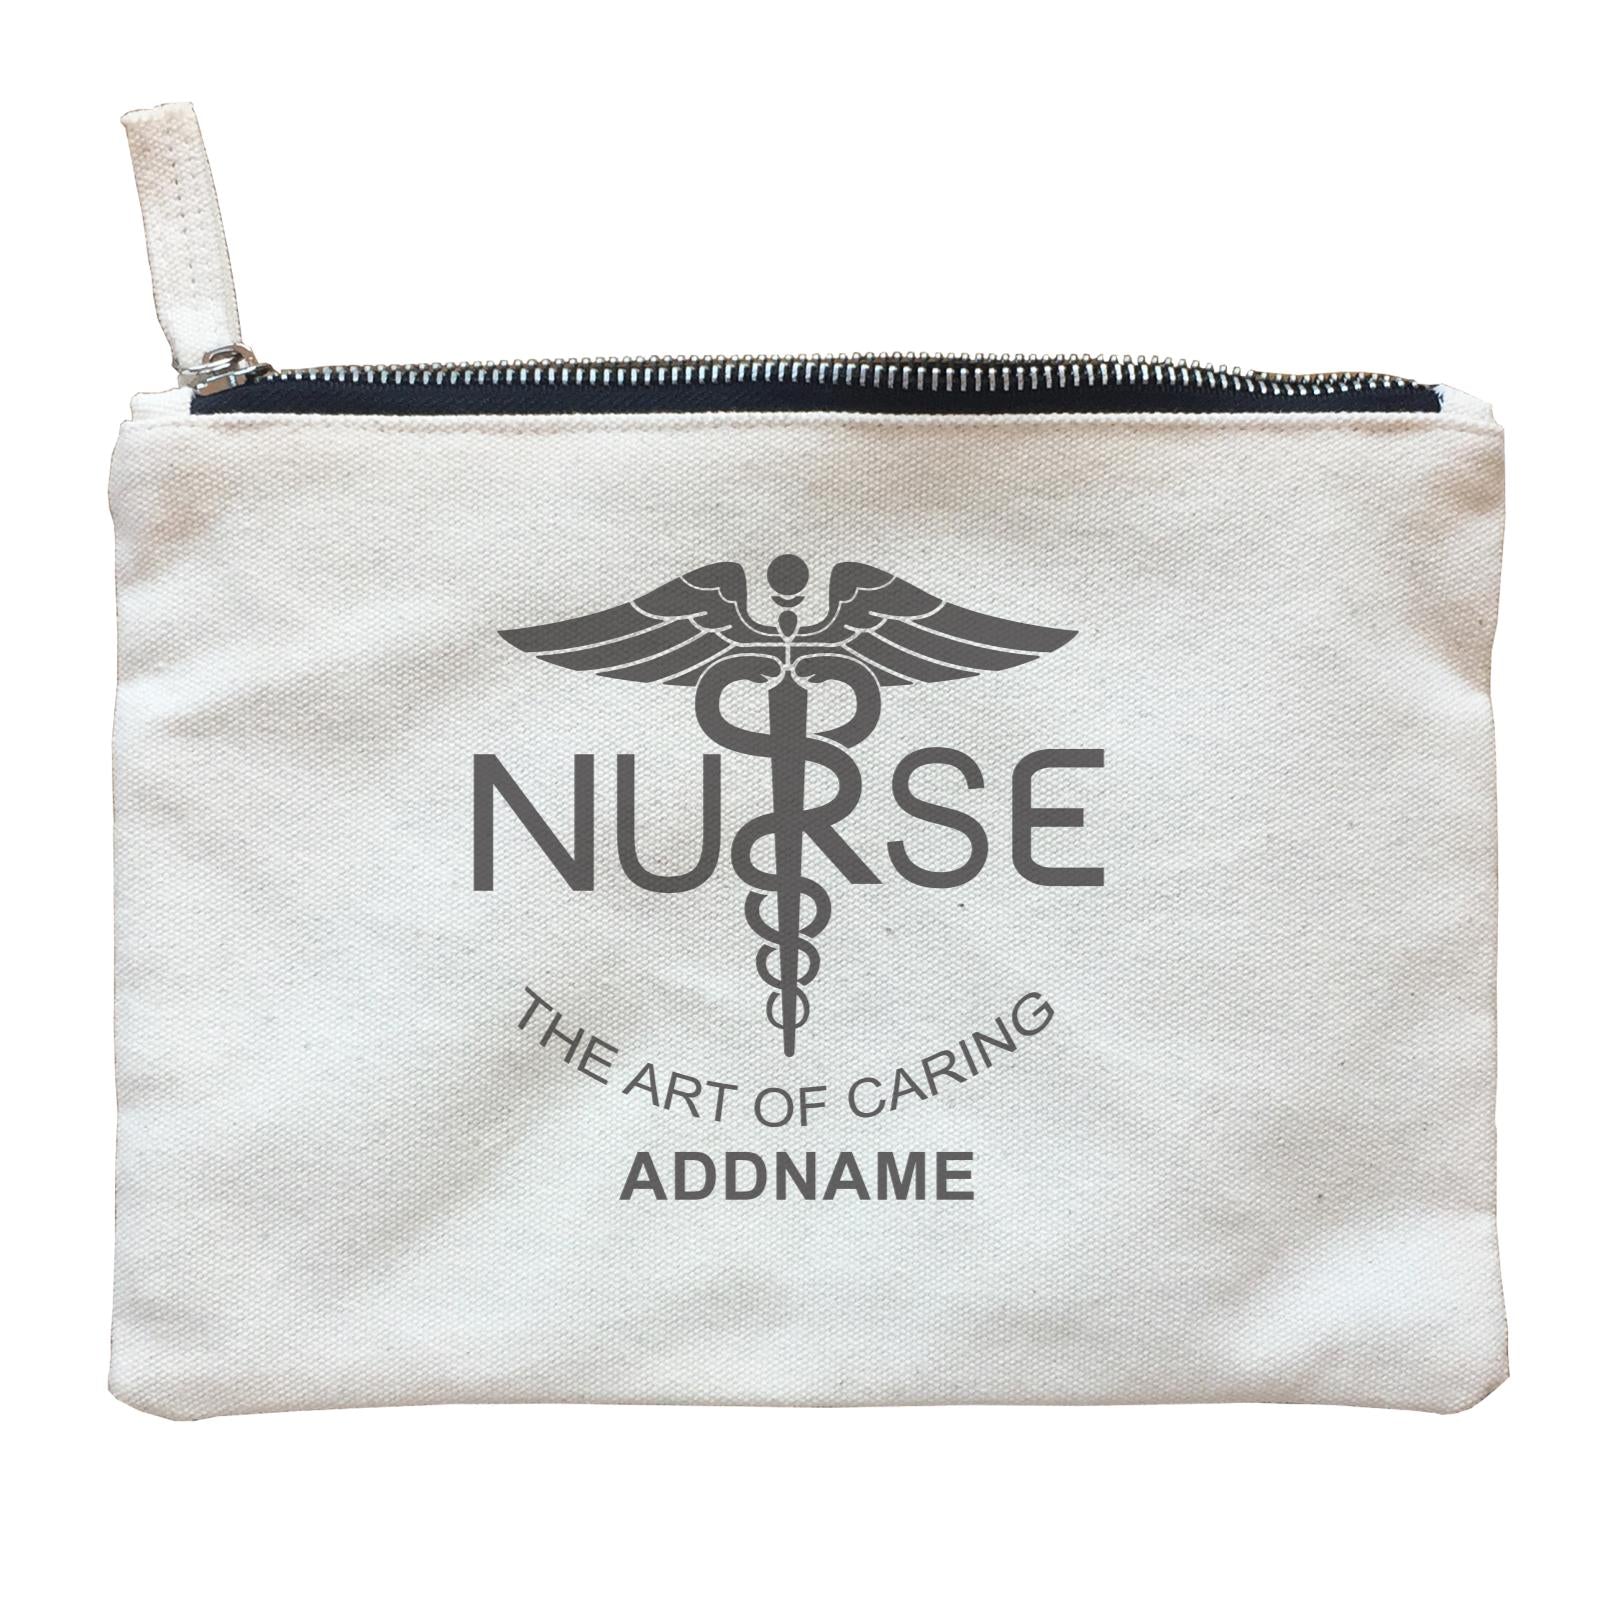 Nurse Quotes The Art Of Caring Addname Zipper Pouch